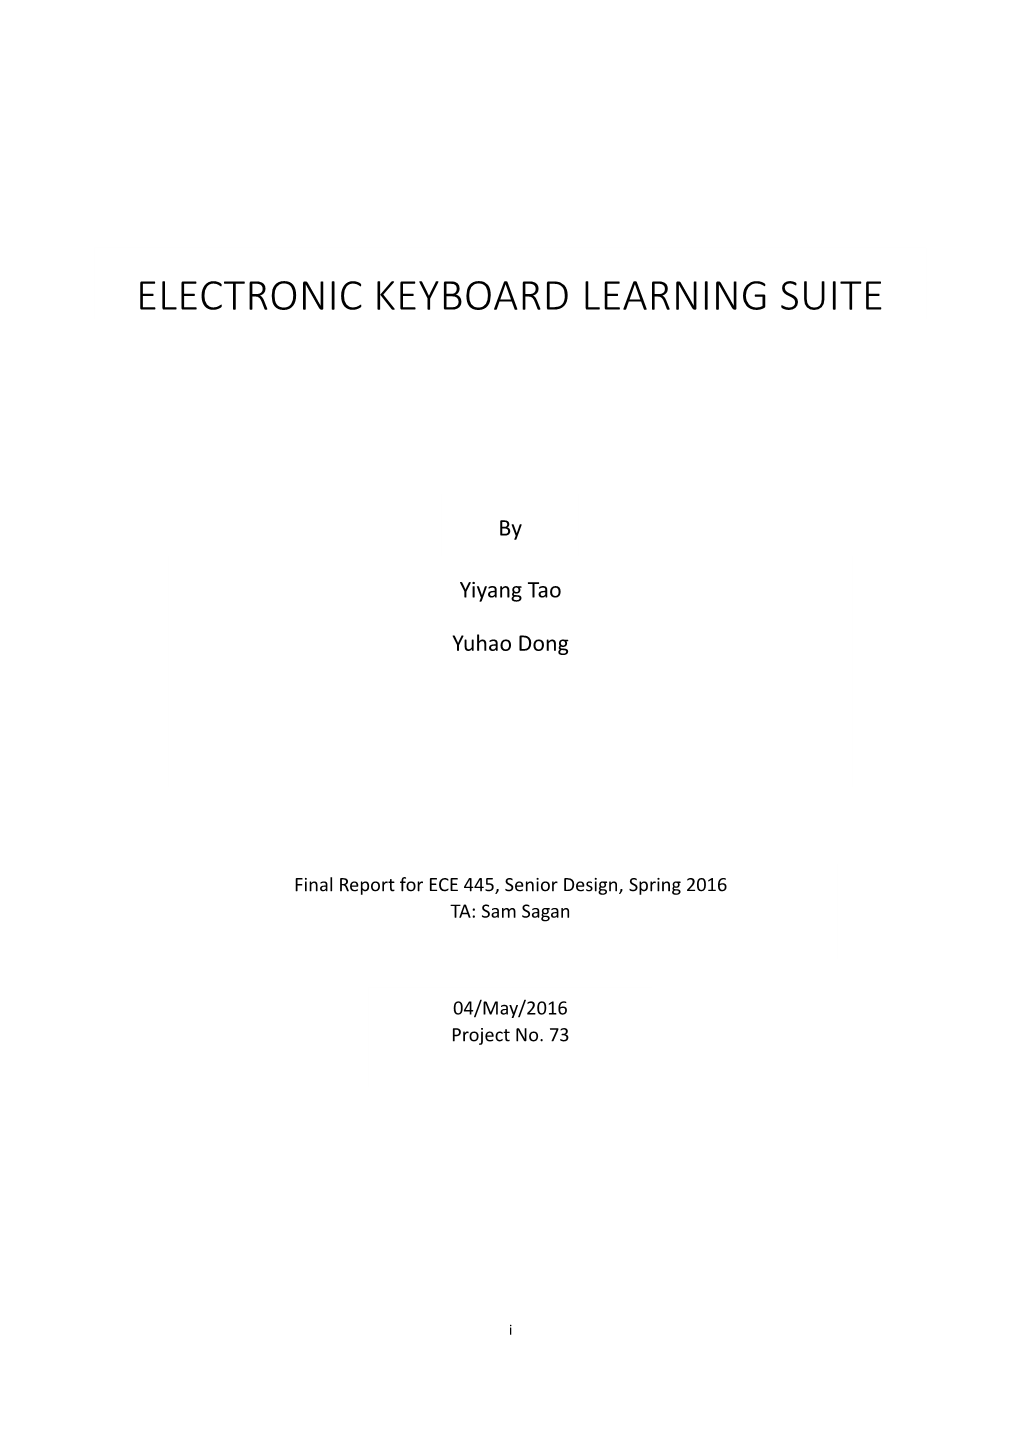 Electronic Keyboard Learning Suite